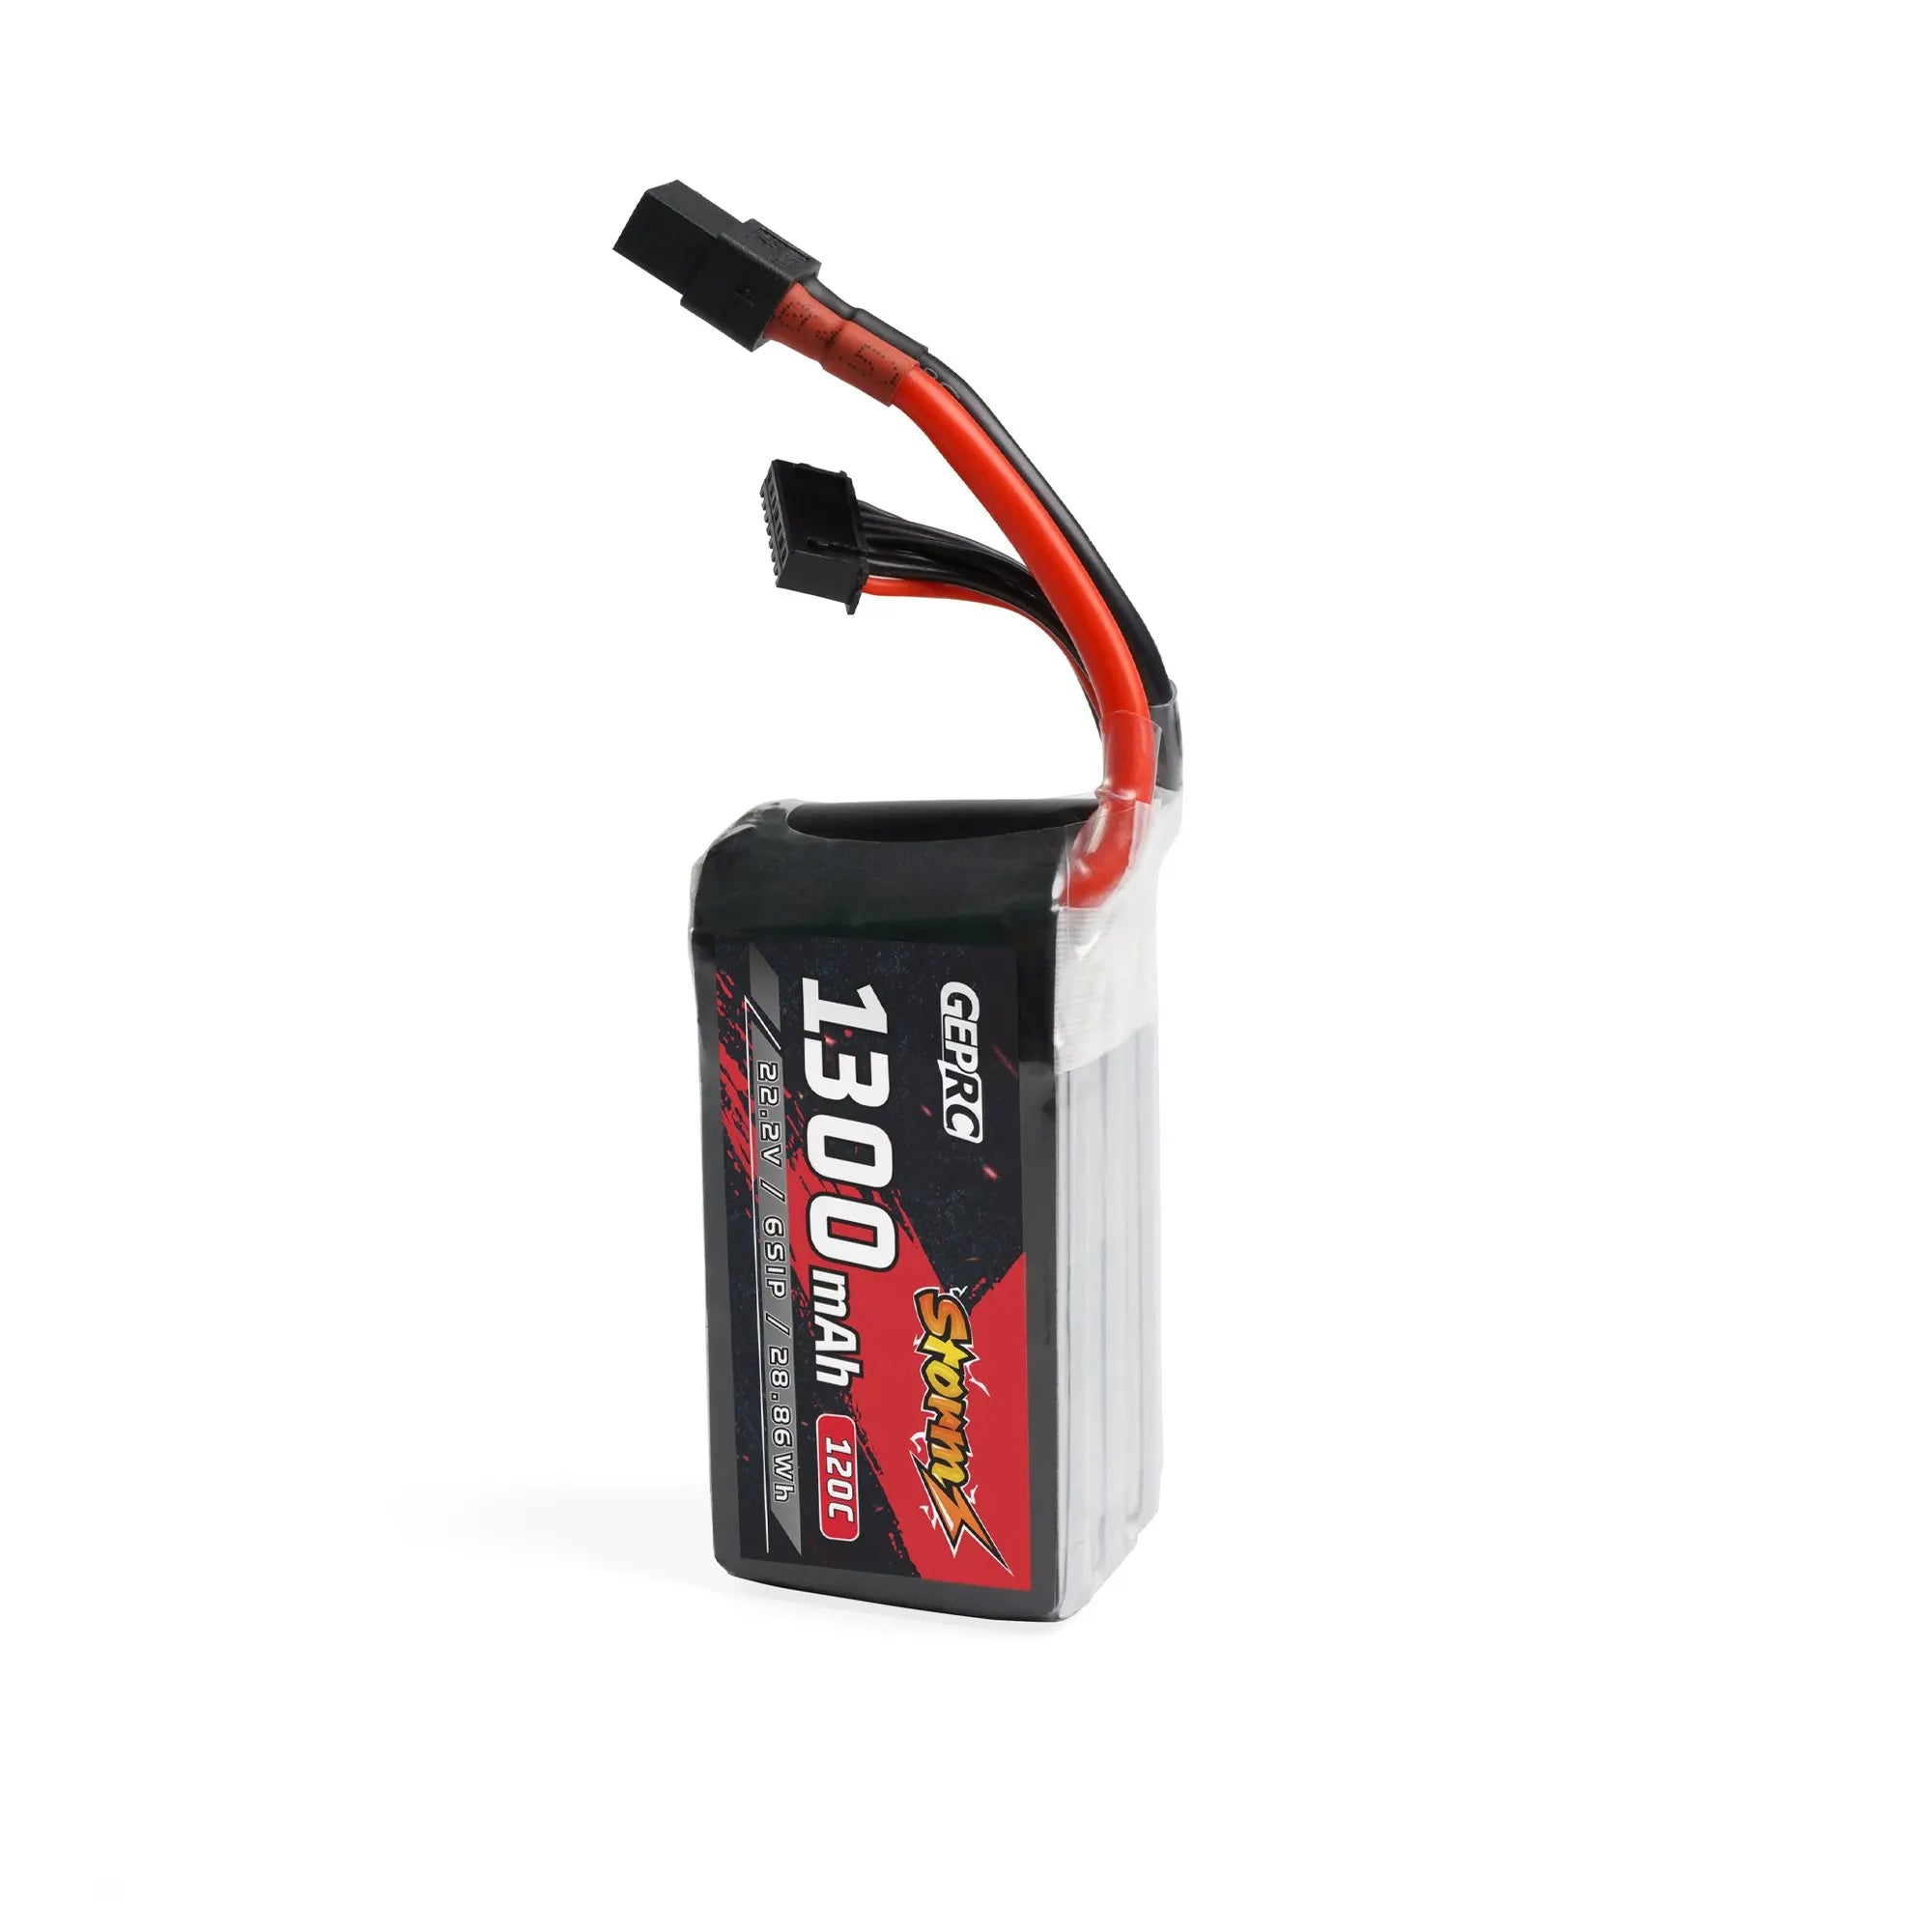 GEPRC Storm 6S 1300mAh 120C Lipo Battery, it's able to continue to discharge at a high multiplier, the current output